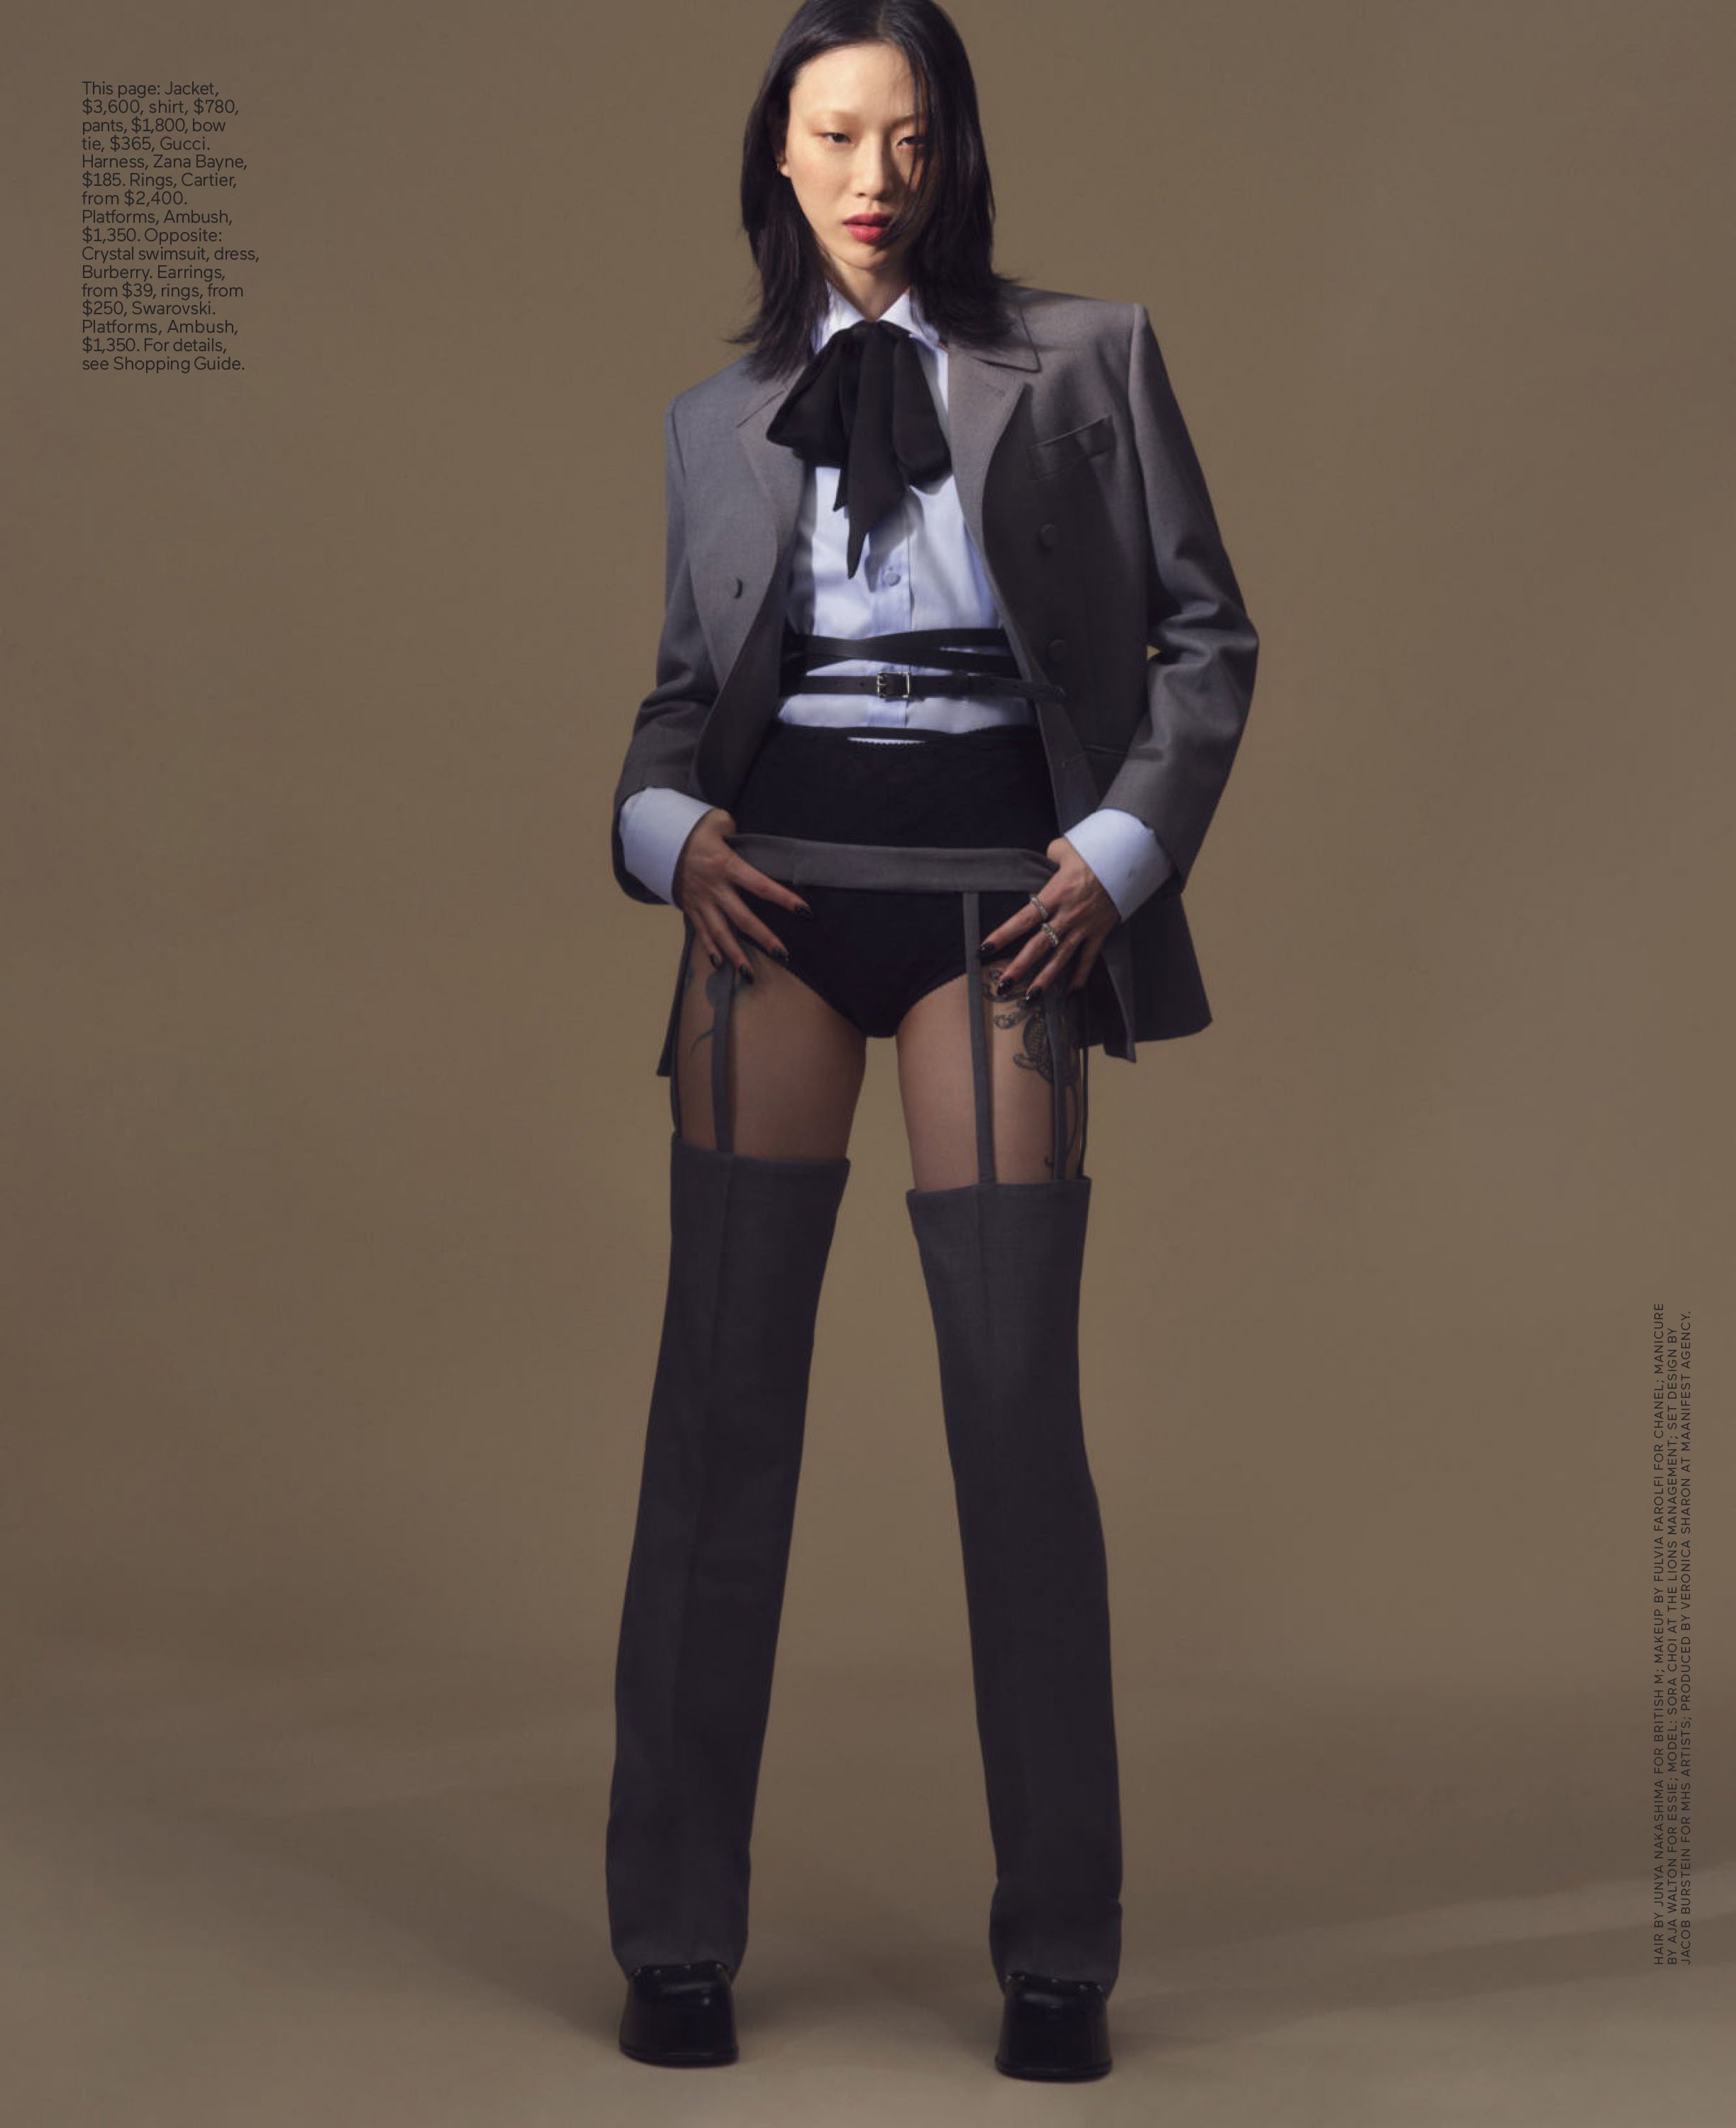 Sora Choi in 'She's Come Undone' for ELLE US March 2023 — Anne of